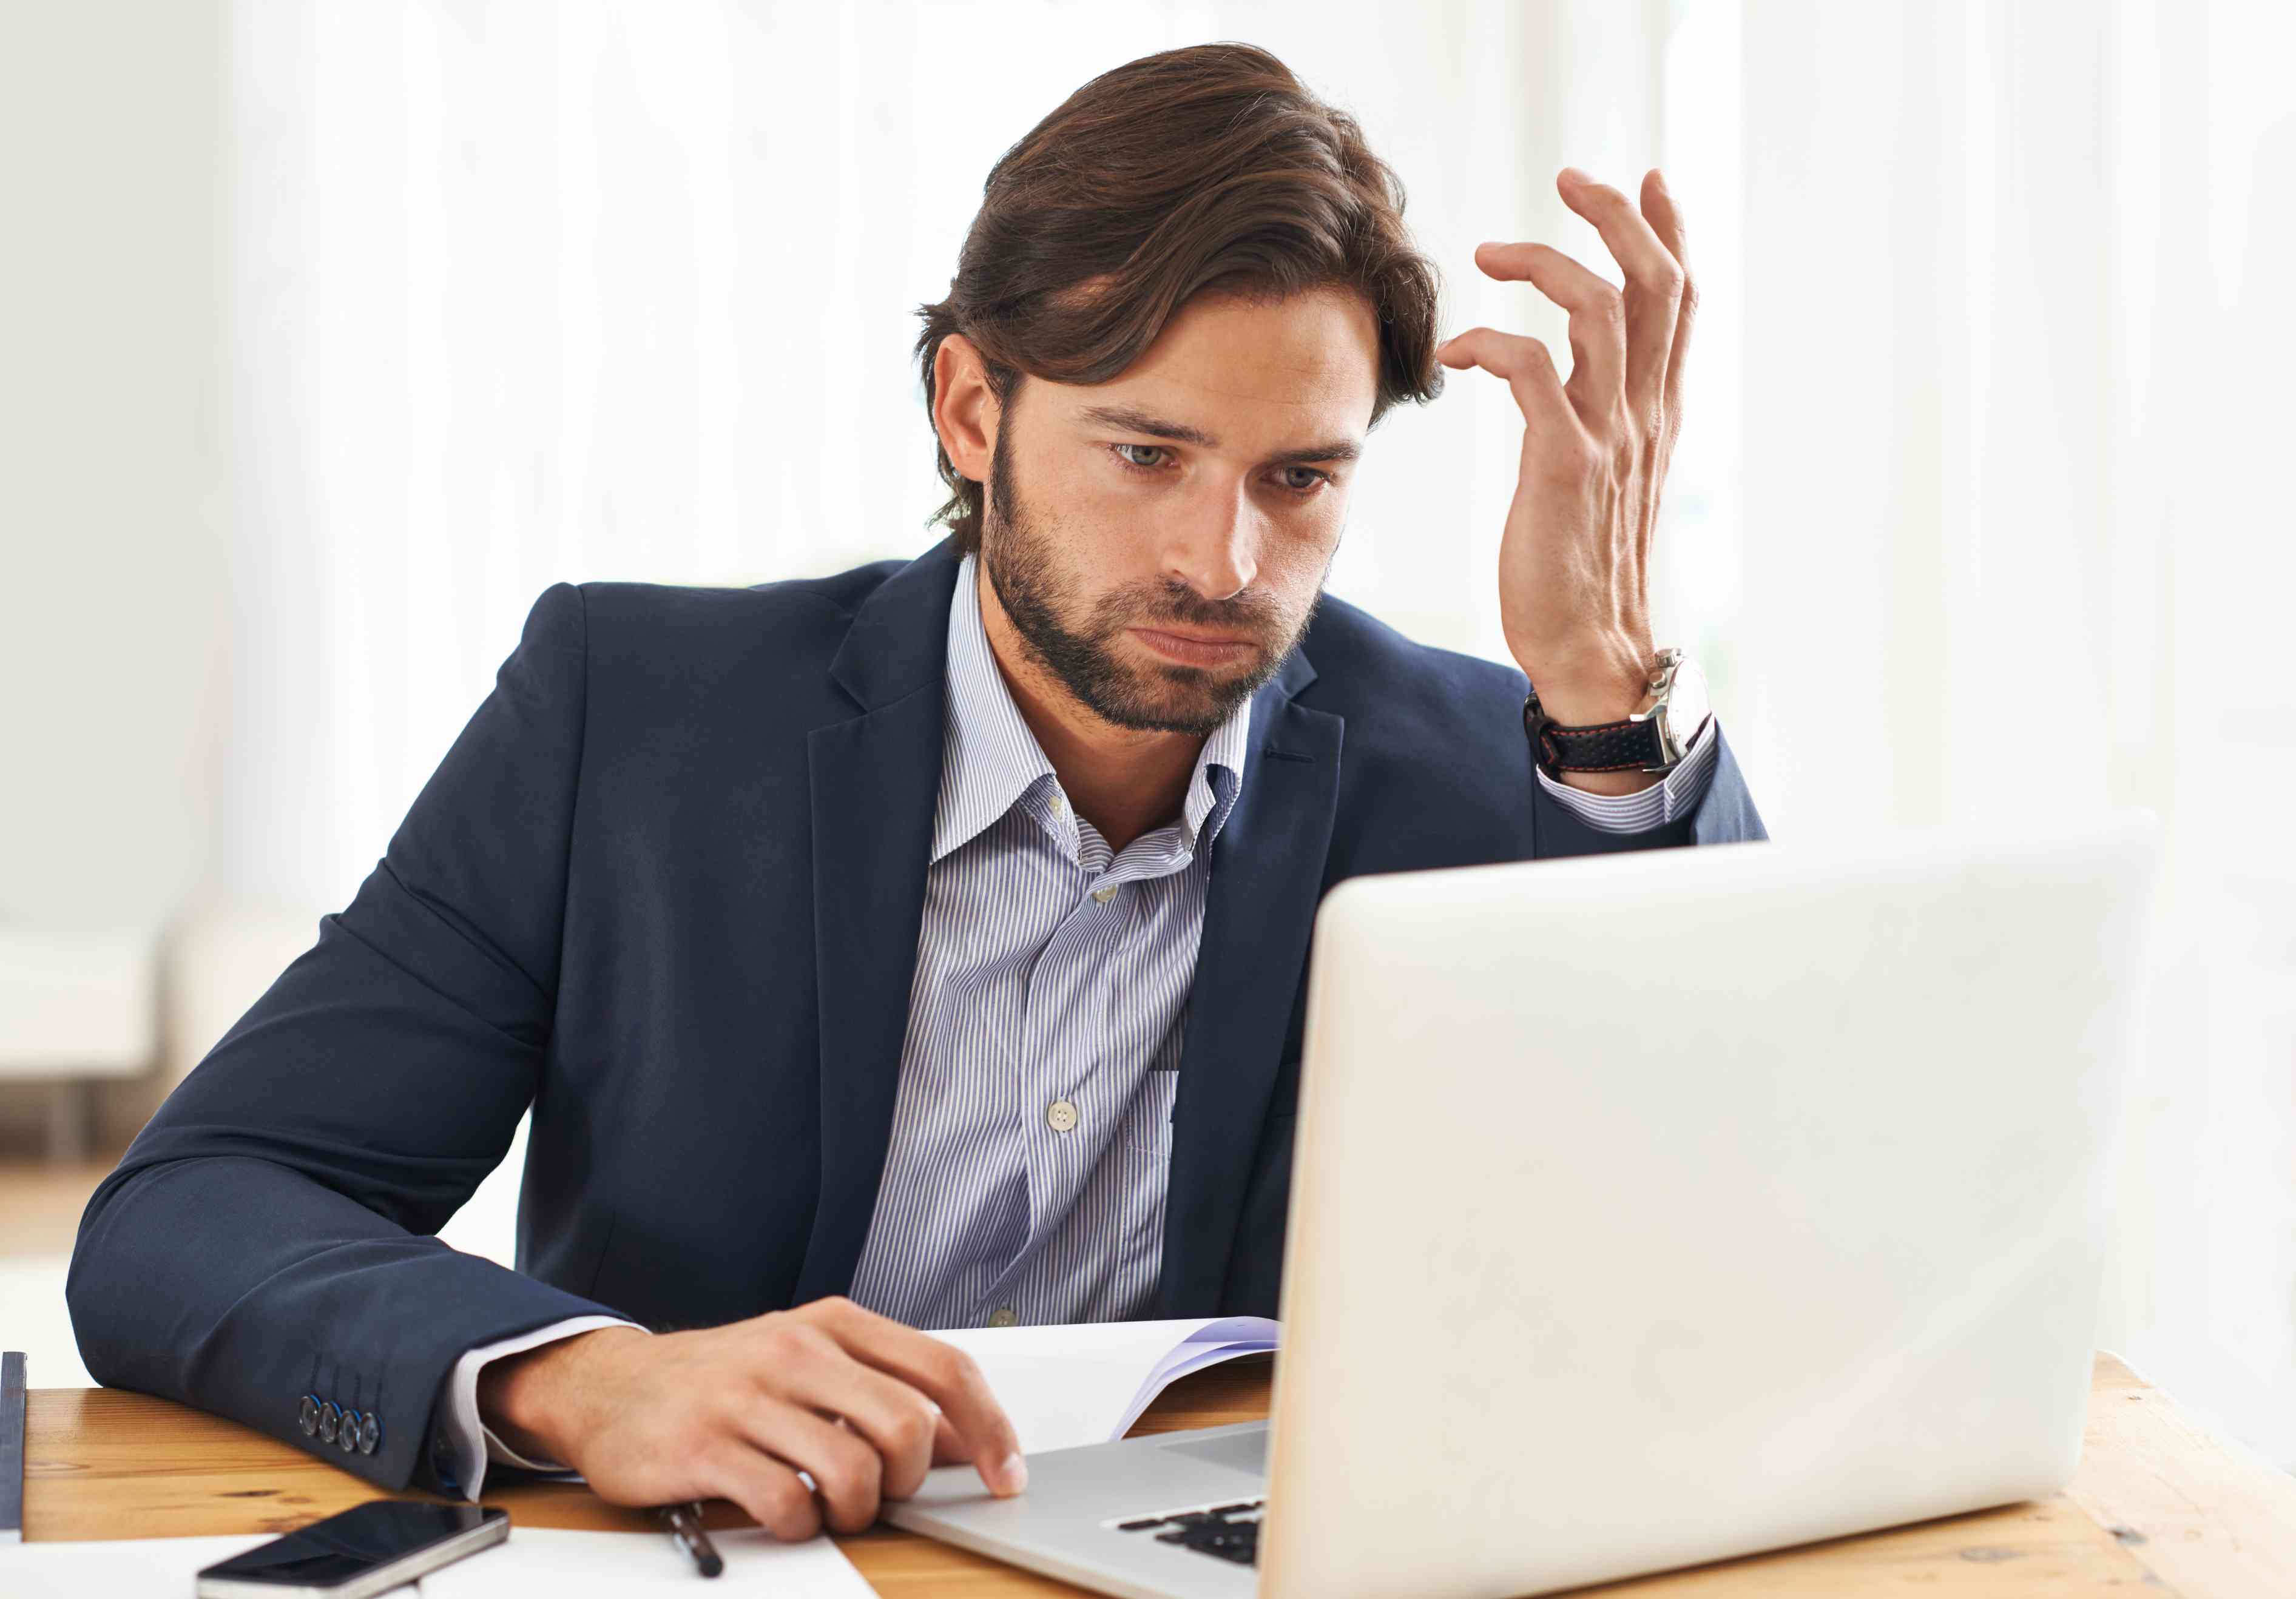 Frustrated Man Looks at Laptop Screen 